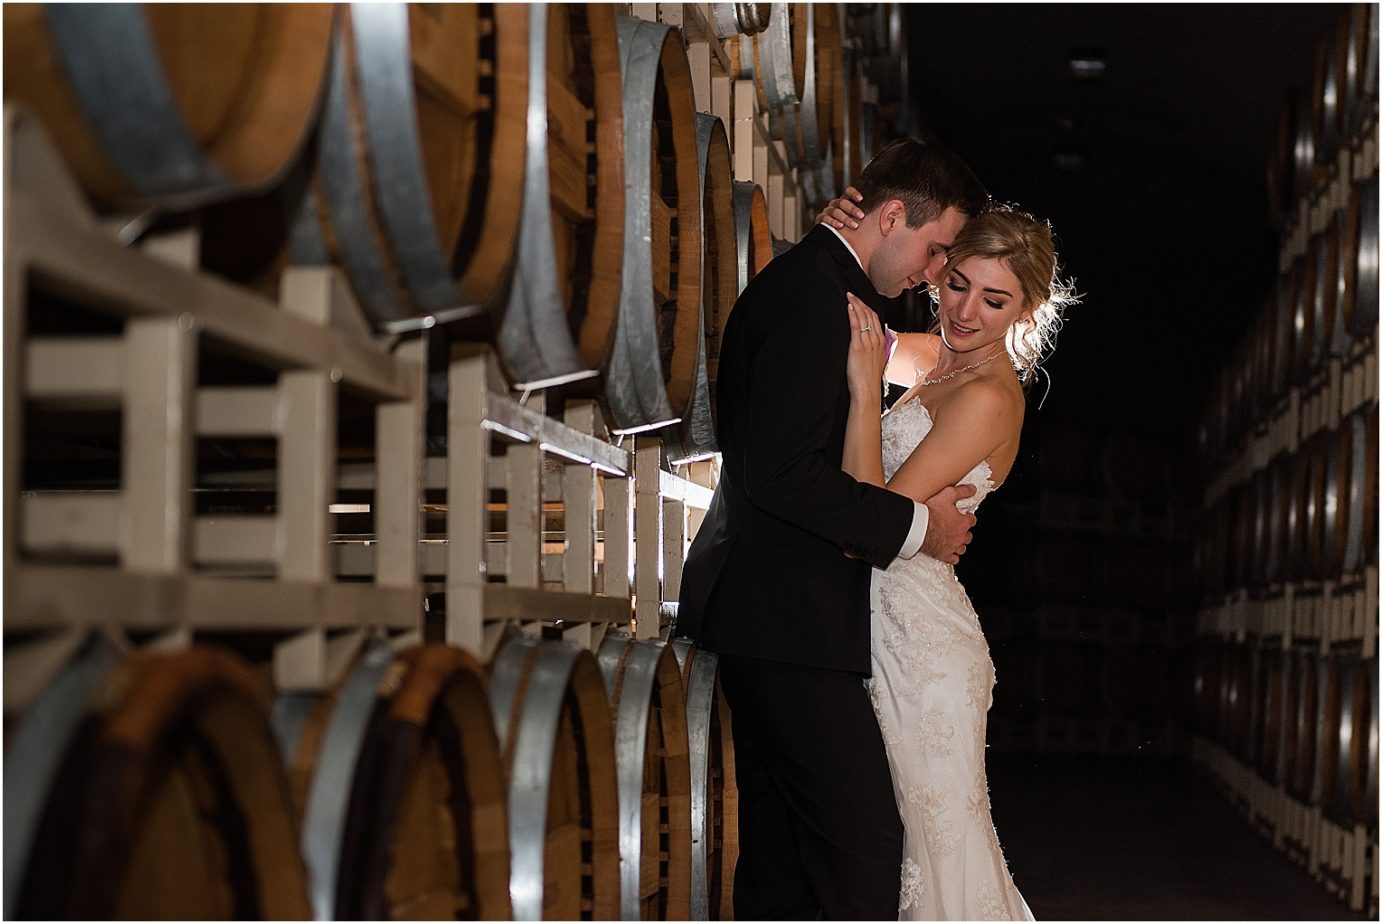 Terra Blanca Winery Wedding Benton City Photographer Armin and Kendall bride and groom in wine caves